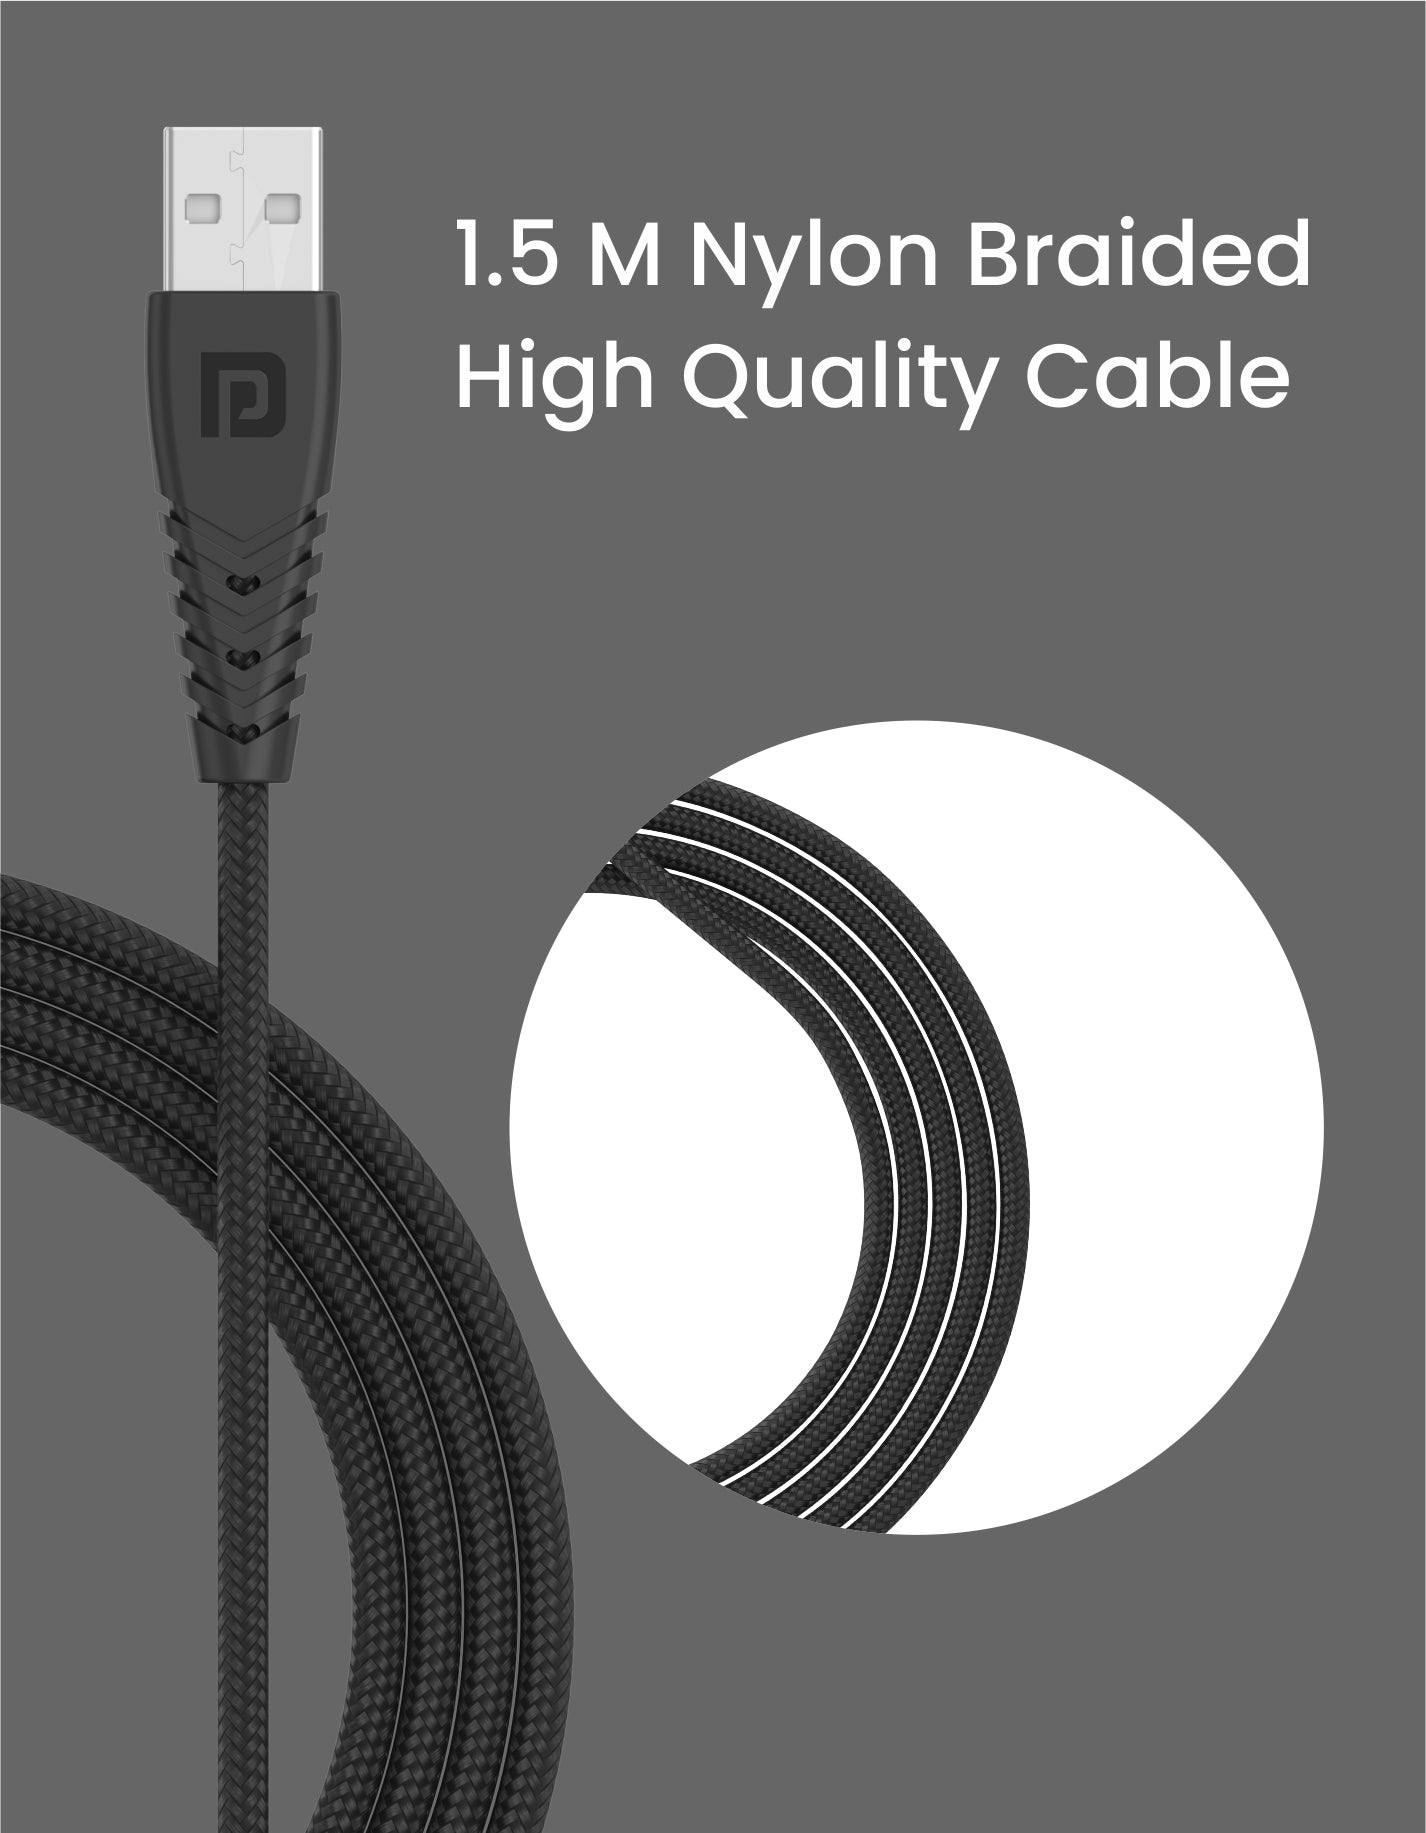 Portronics Konnect A Trio 3-in-1 micro USB, iOS, and Type C Cable 1.5meter long cable